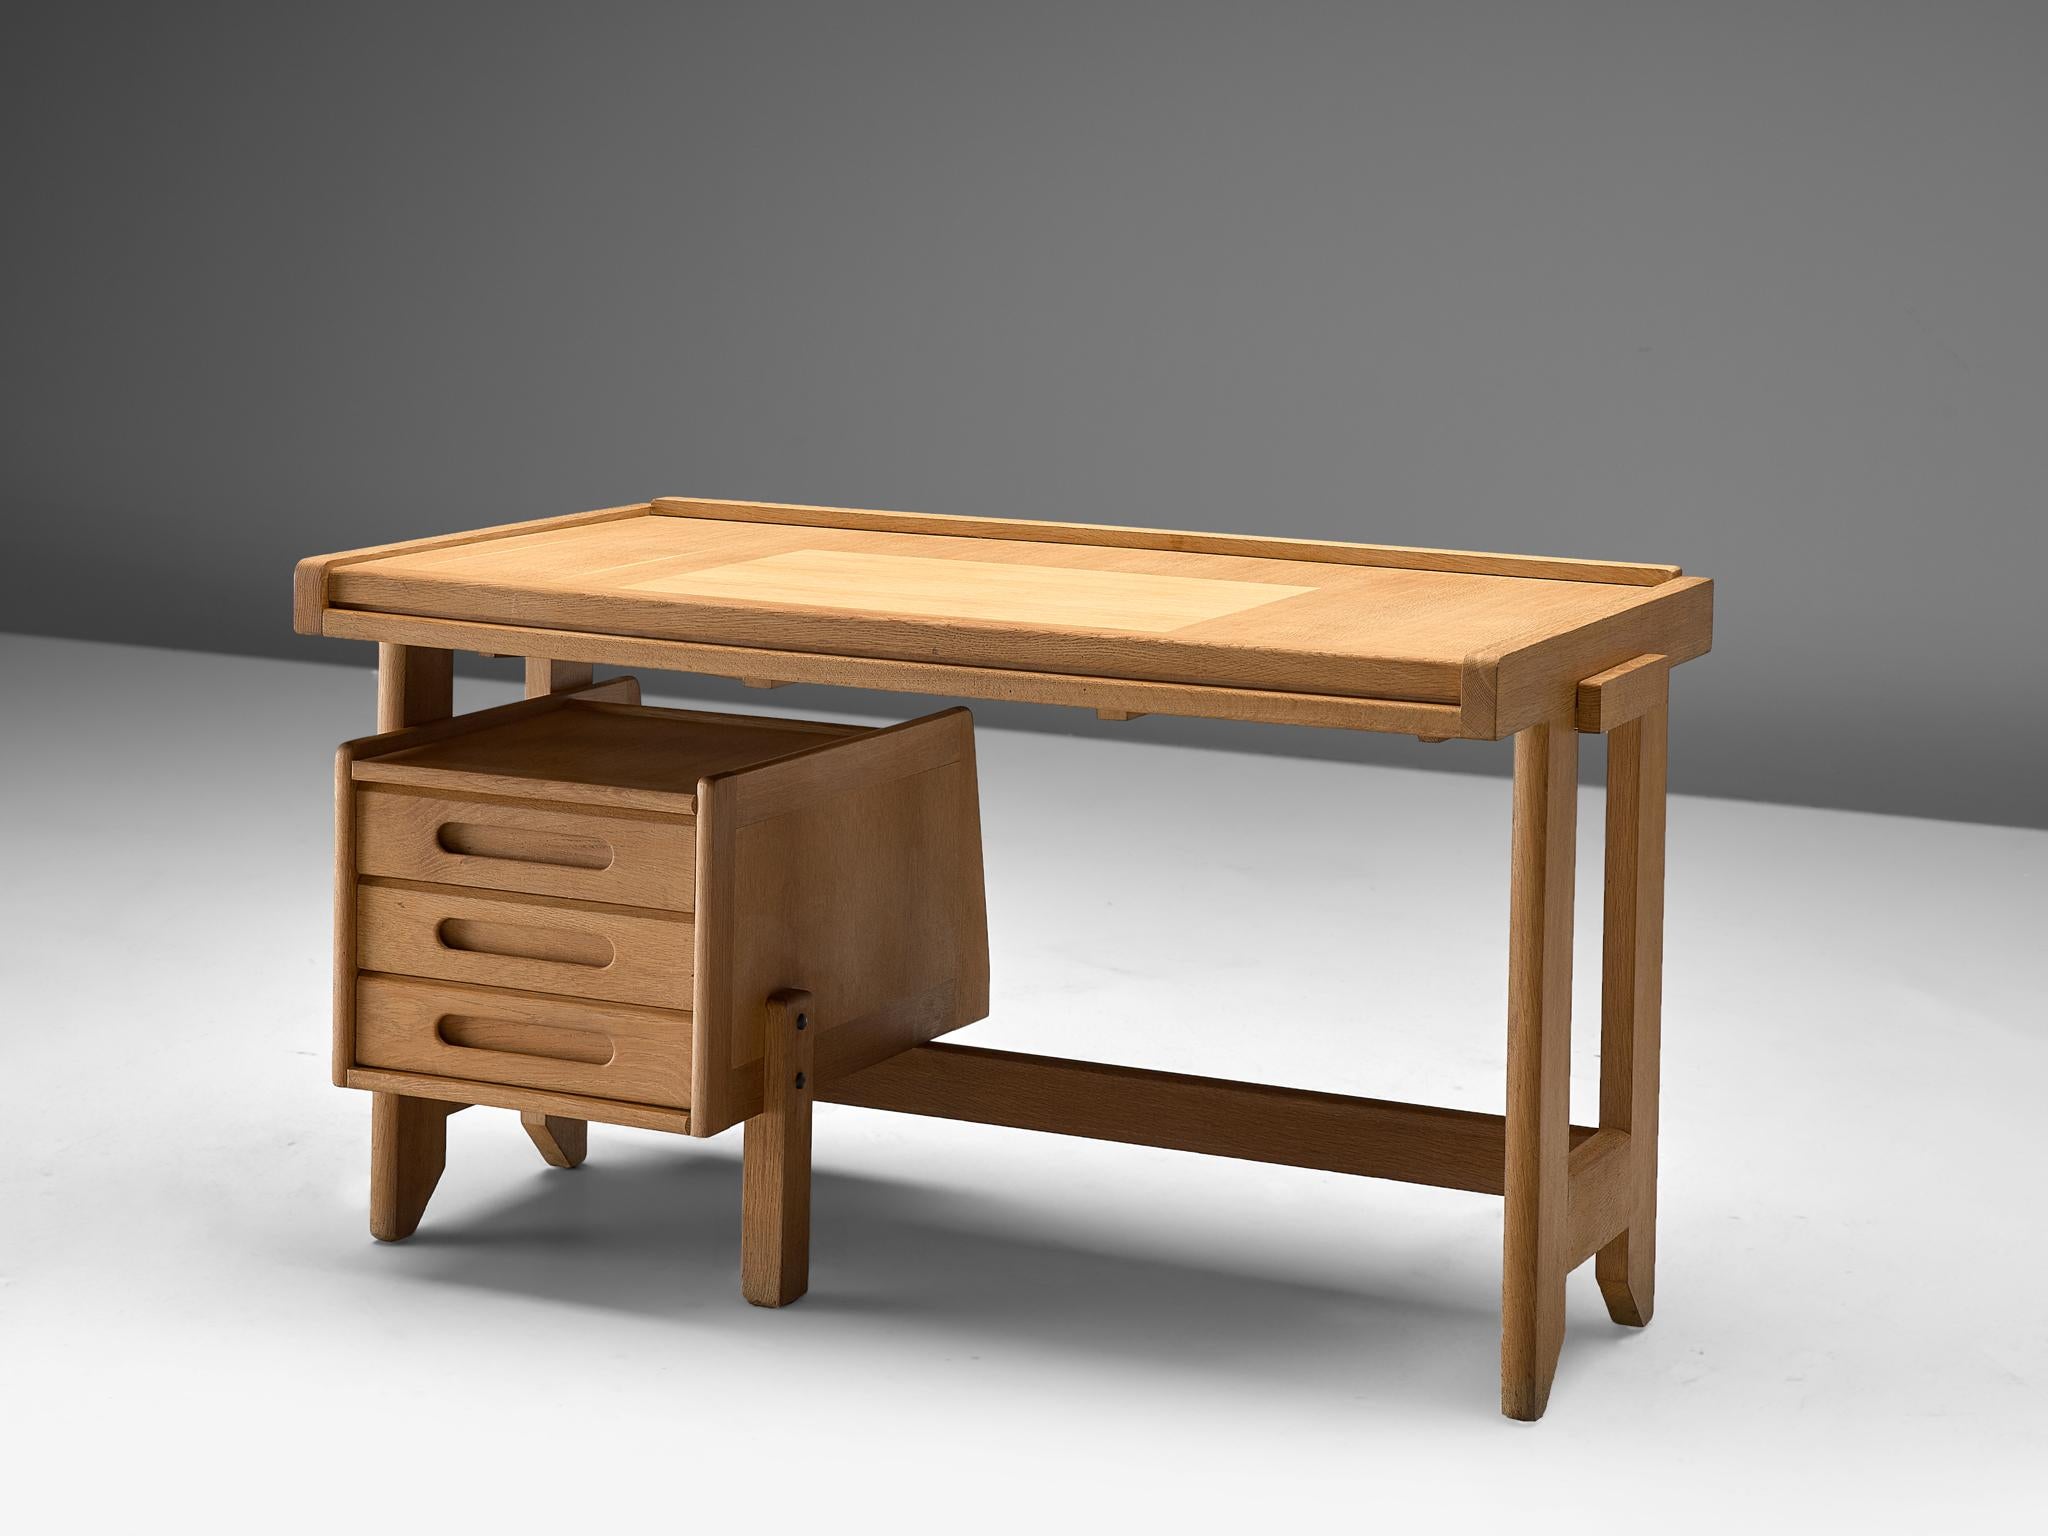 Guillerme et Chambron, desk, oak, France, 1960s.

This small desk is designed by the French designer duo Guillerme and Chambron. The writing desk holds the characteristic decorations and lines of this duo such as the sculptural legs. The top is